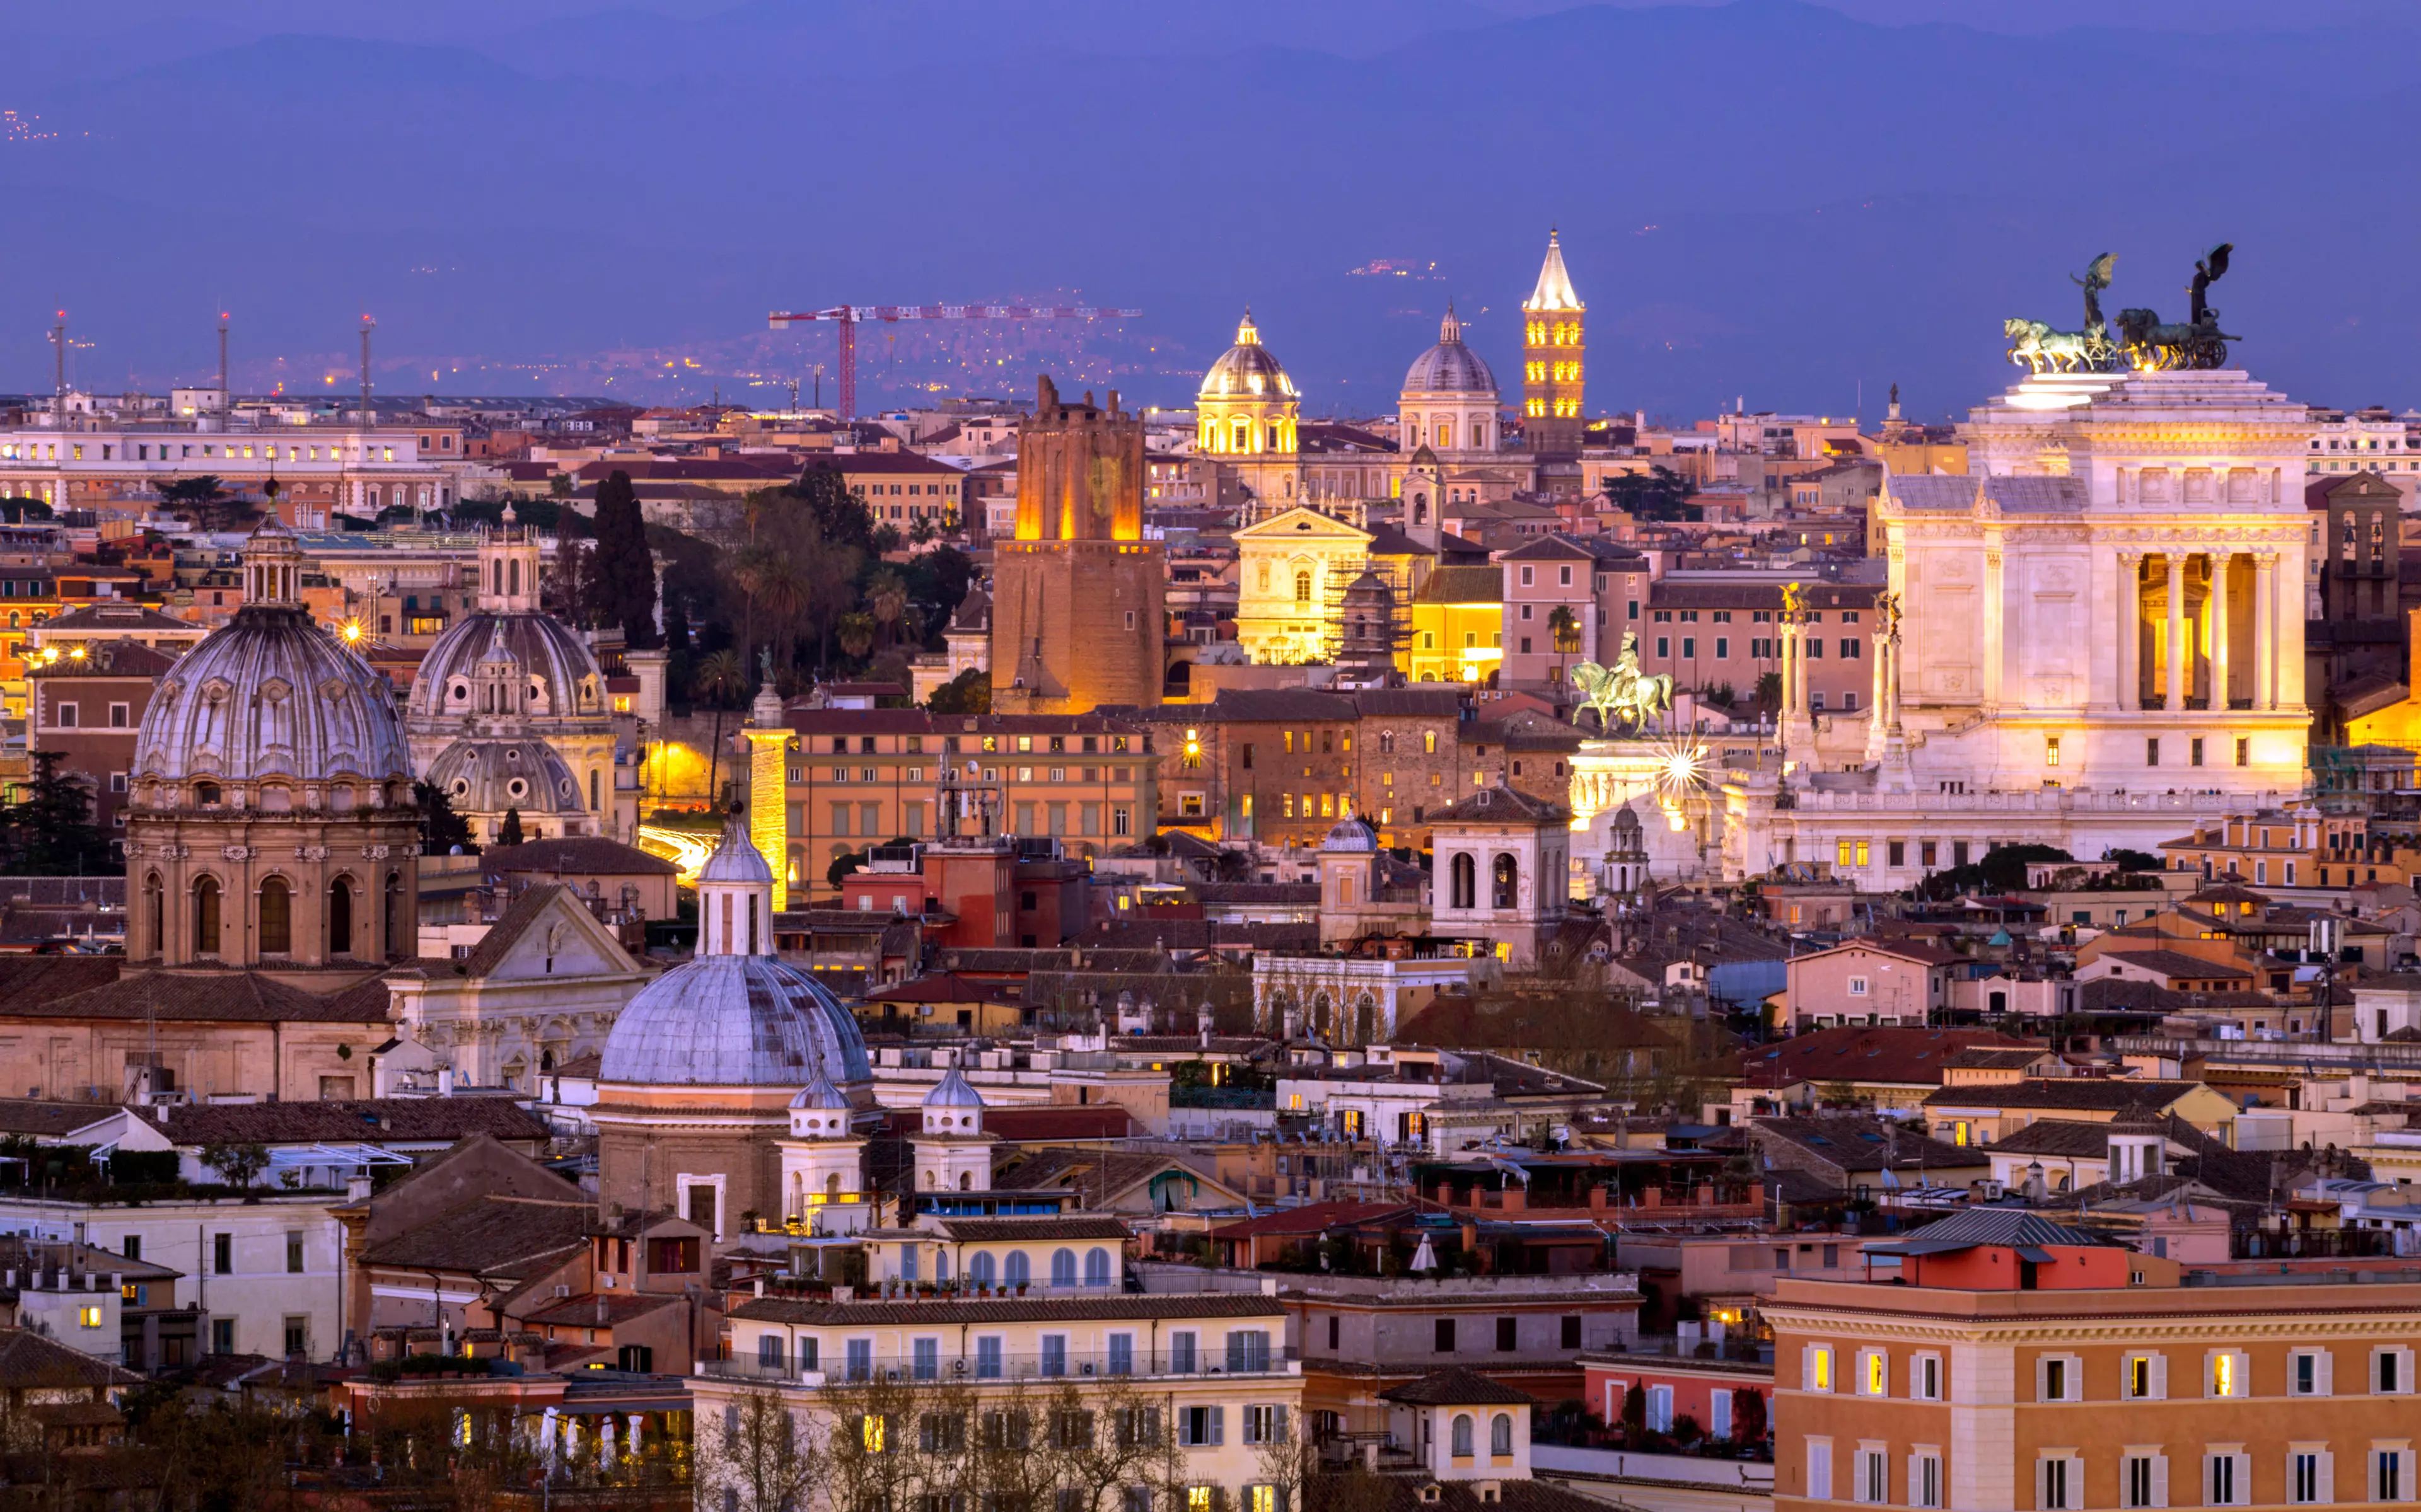 Stock image of Rome.